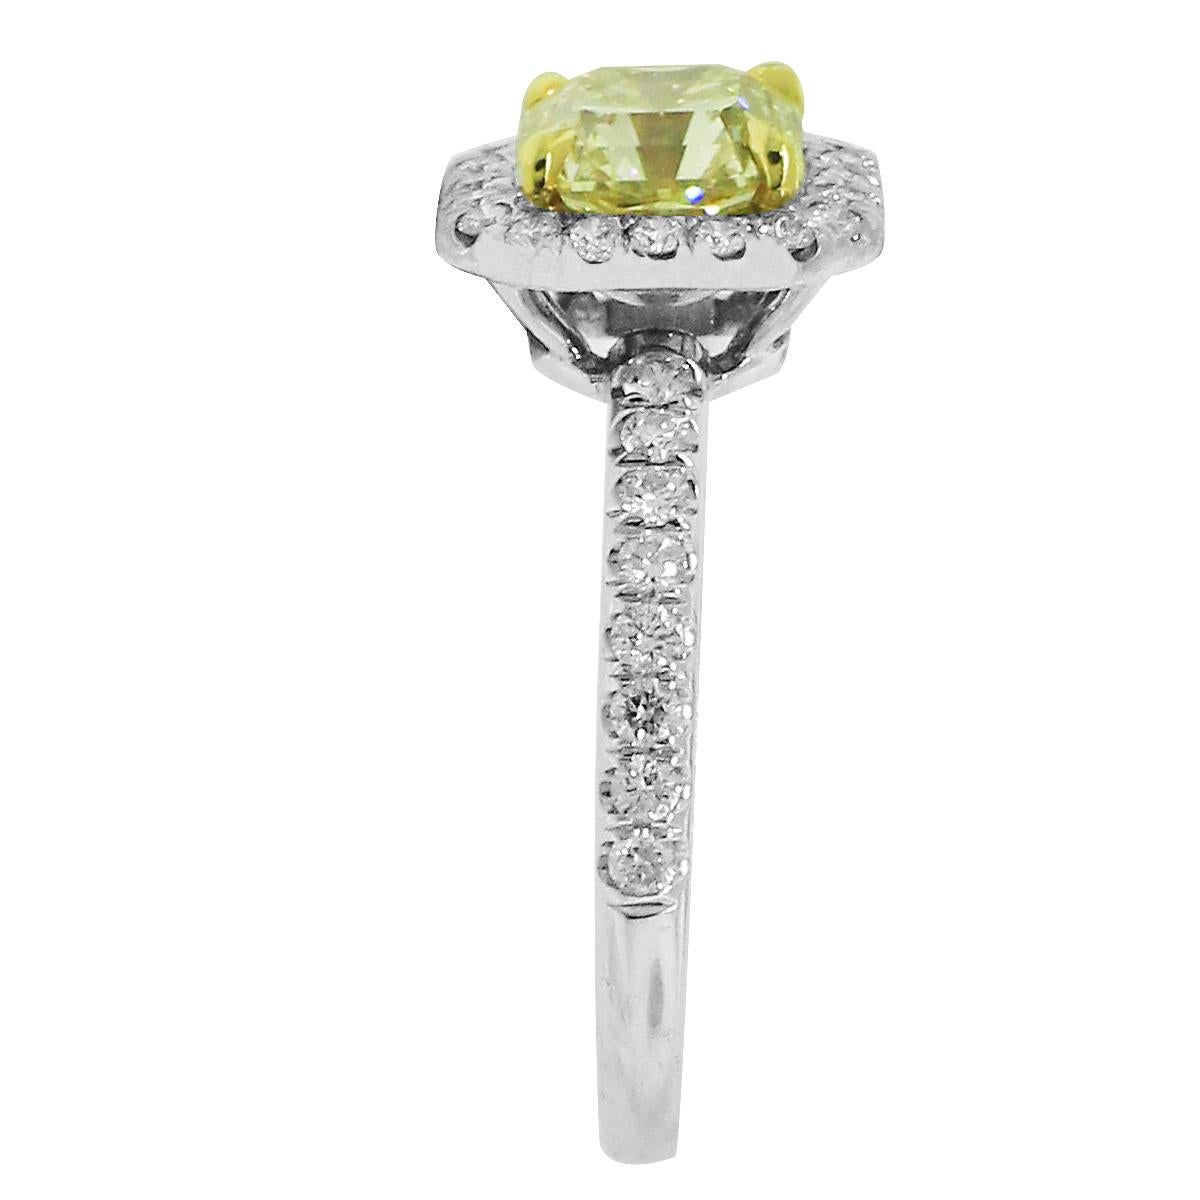 Material: 18k White Gold
Diamond Details: Center diamond is 1.52ct Fancy yellow and VS1 in clarity. GIA Certified #1162034730
Accent Diamond Details: Approximately 0.32ctw accent diamonds. Accent diamonds are H/I in color and SI in clarity.
Ring